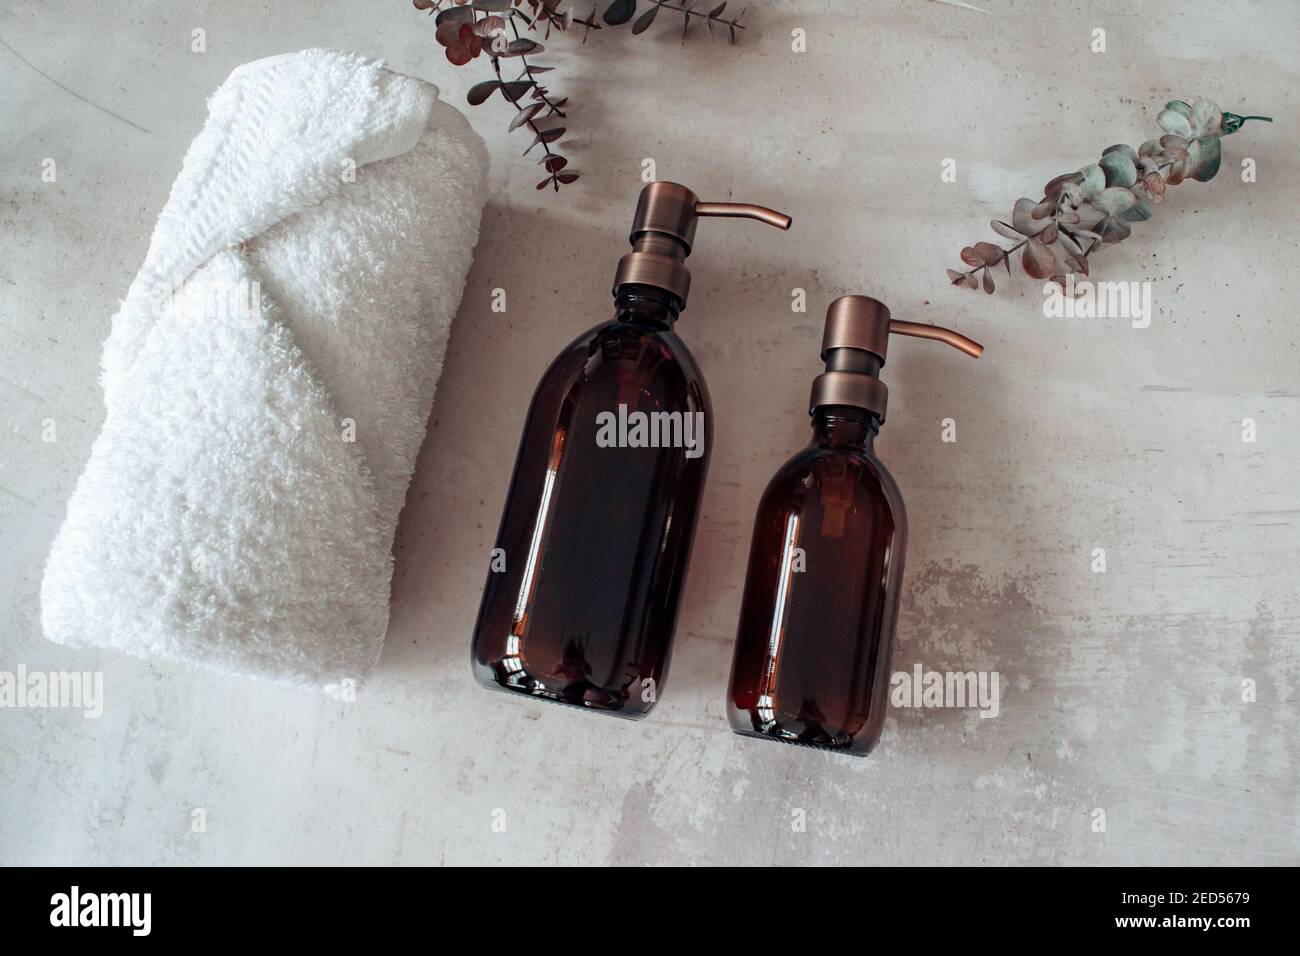 Amber glass shampoo or soap bottle dispenser with a copper steel pump against a stone background. Spa towel with eucalyptus. Stock Photo